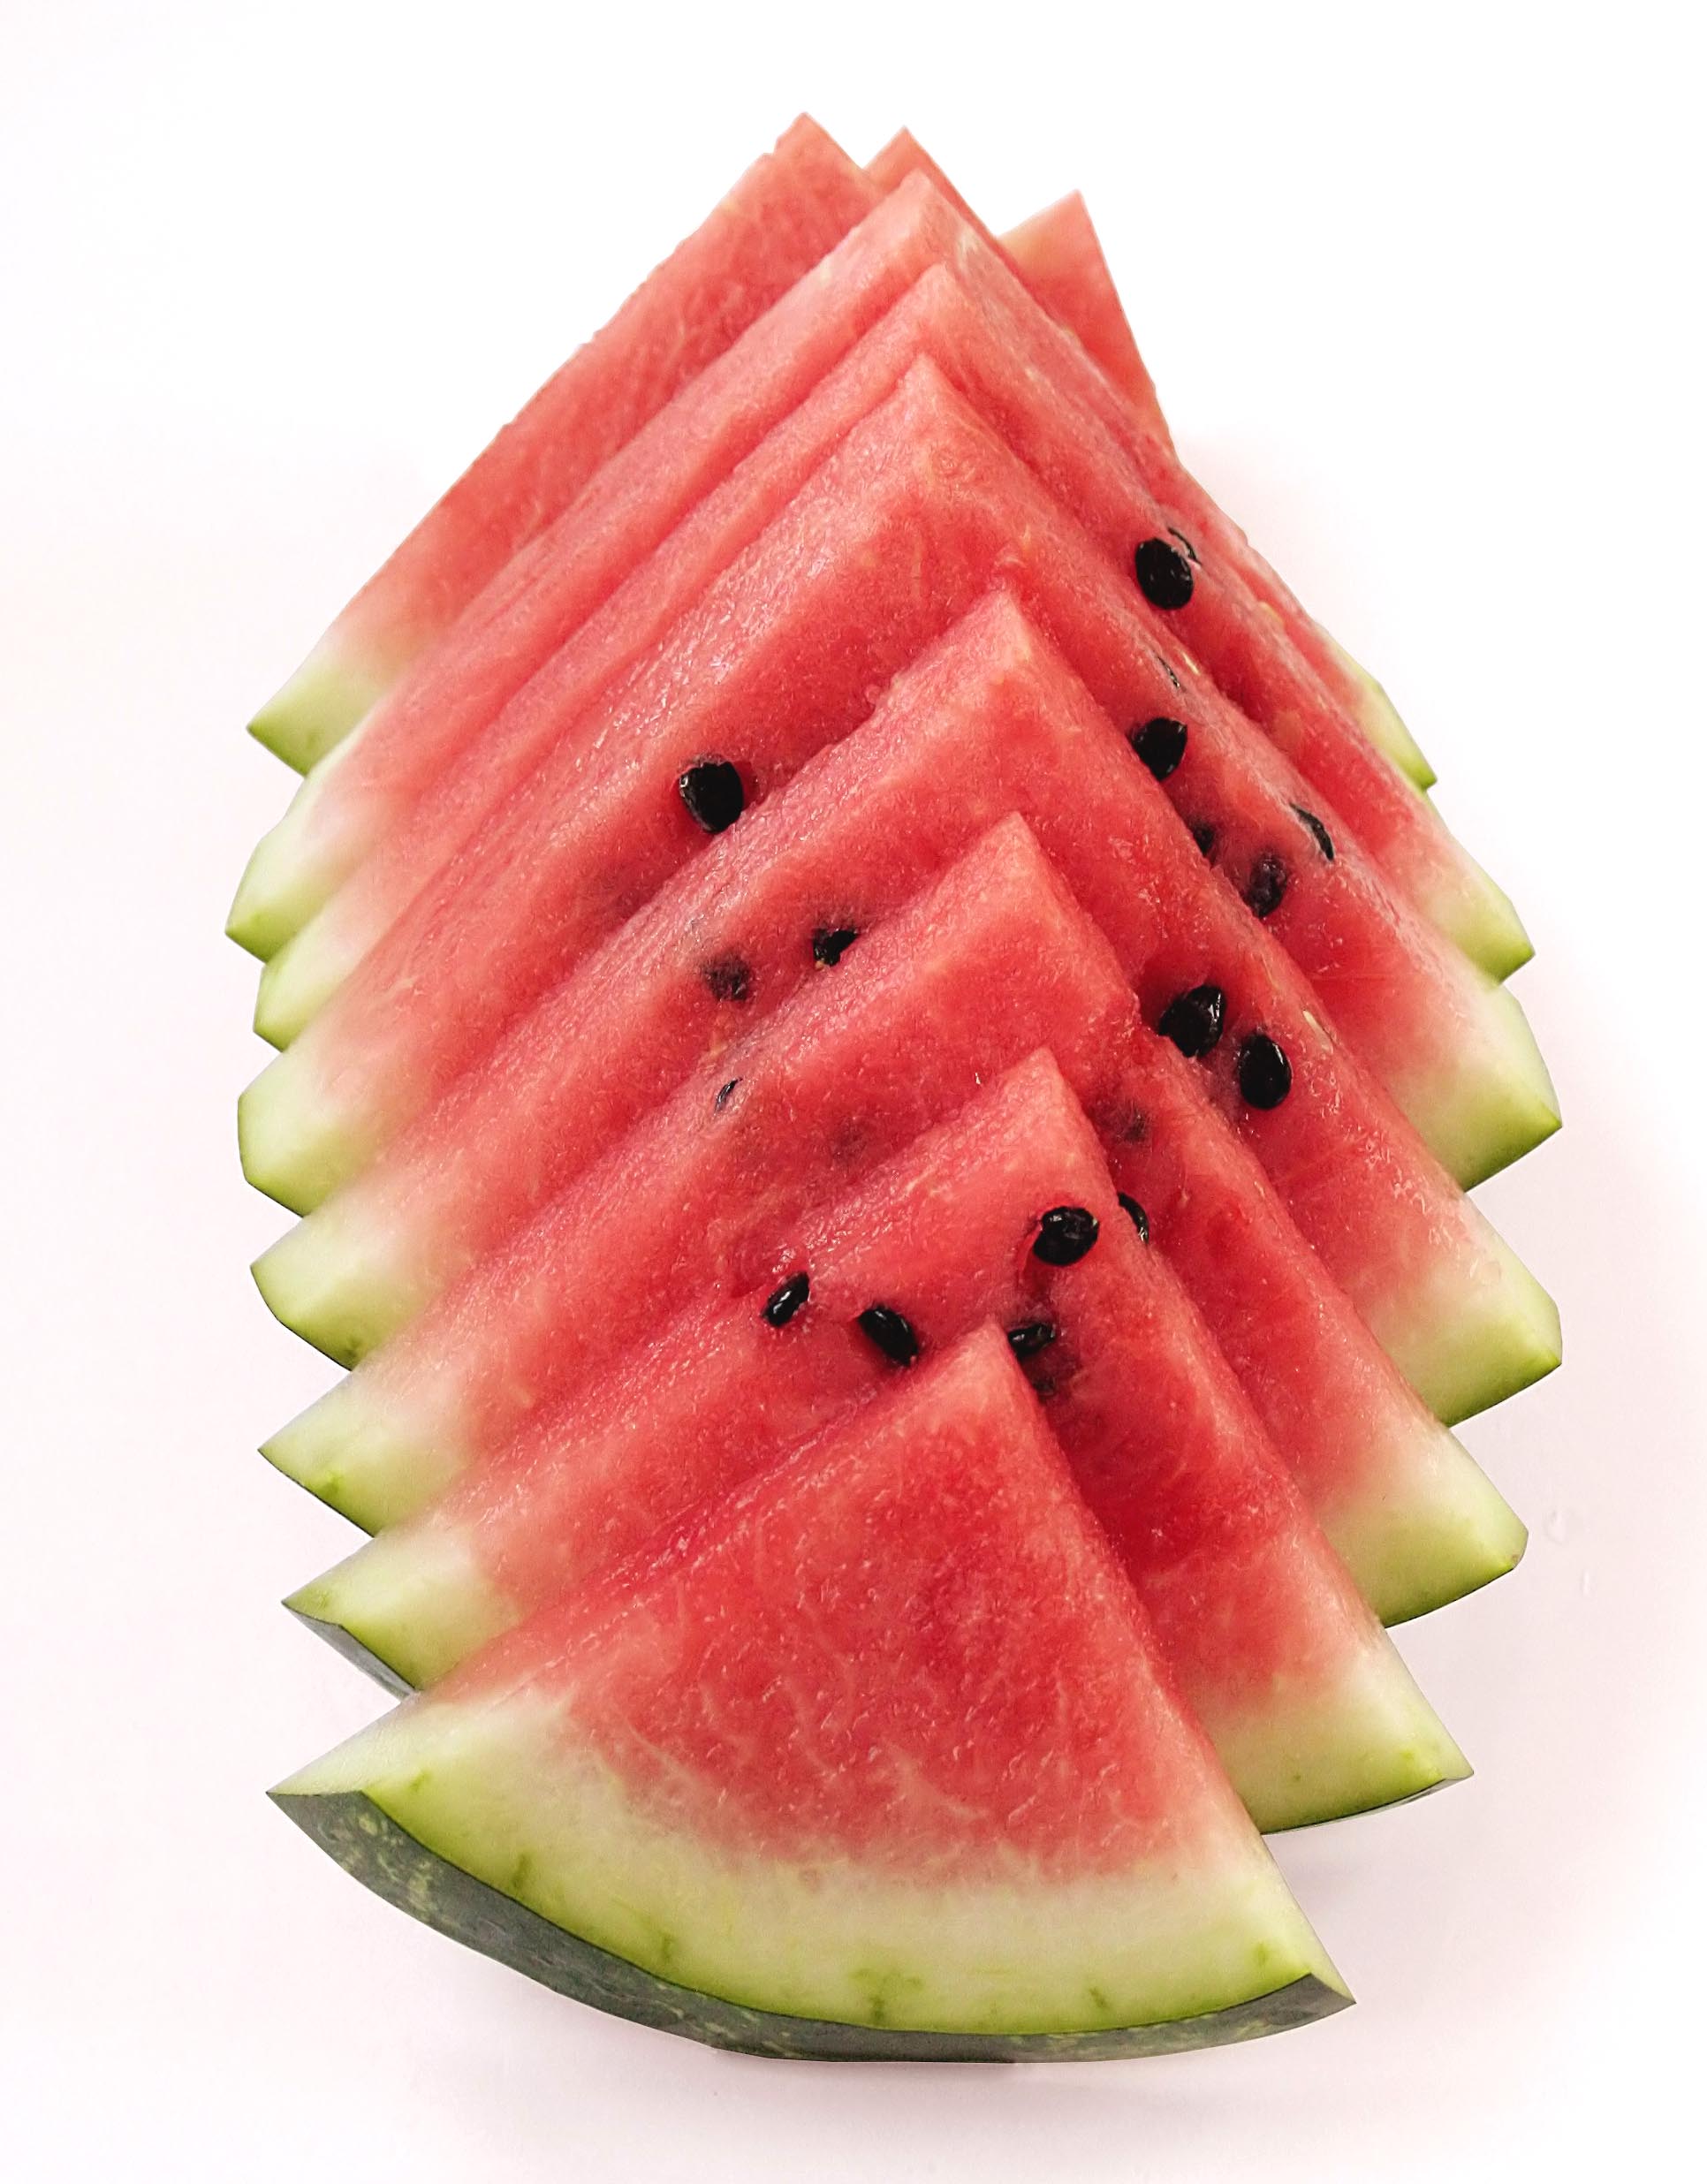 Watermelon for Citrulline and Lycopene